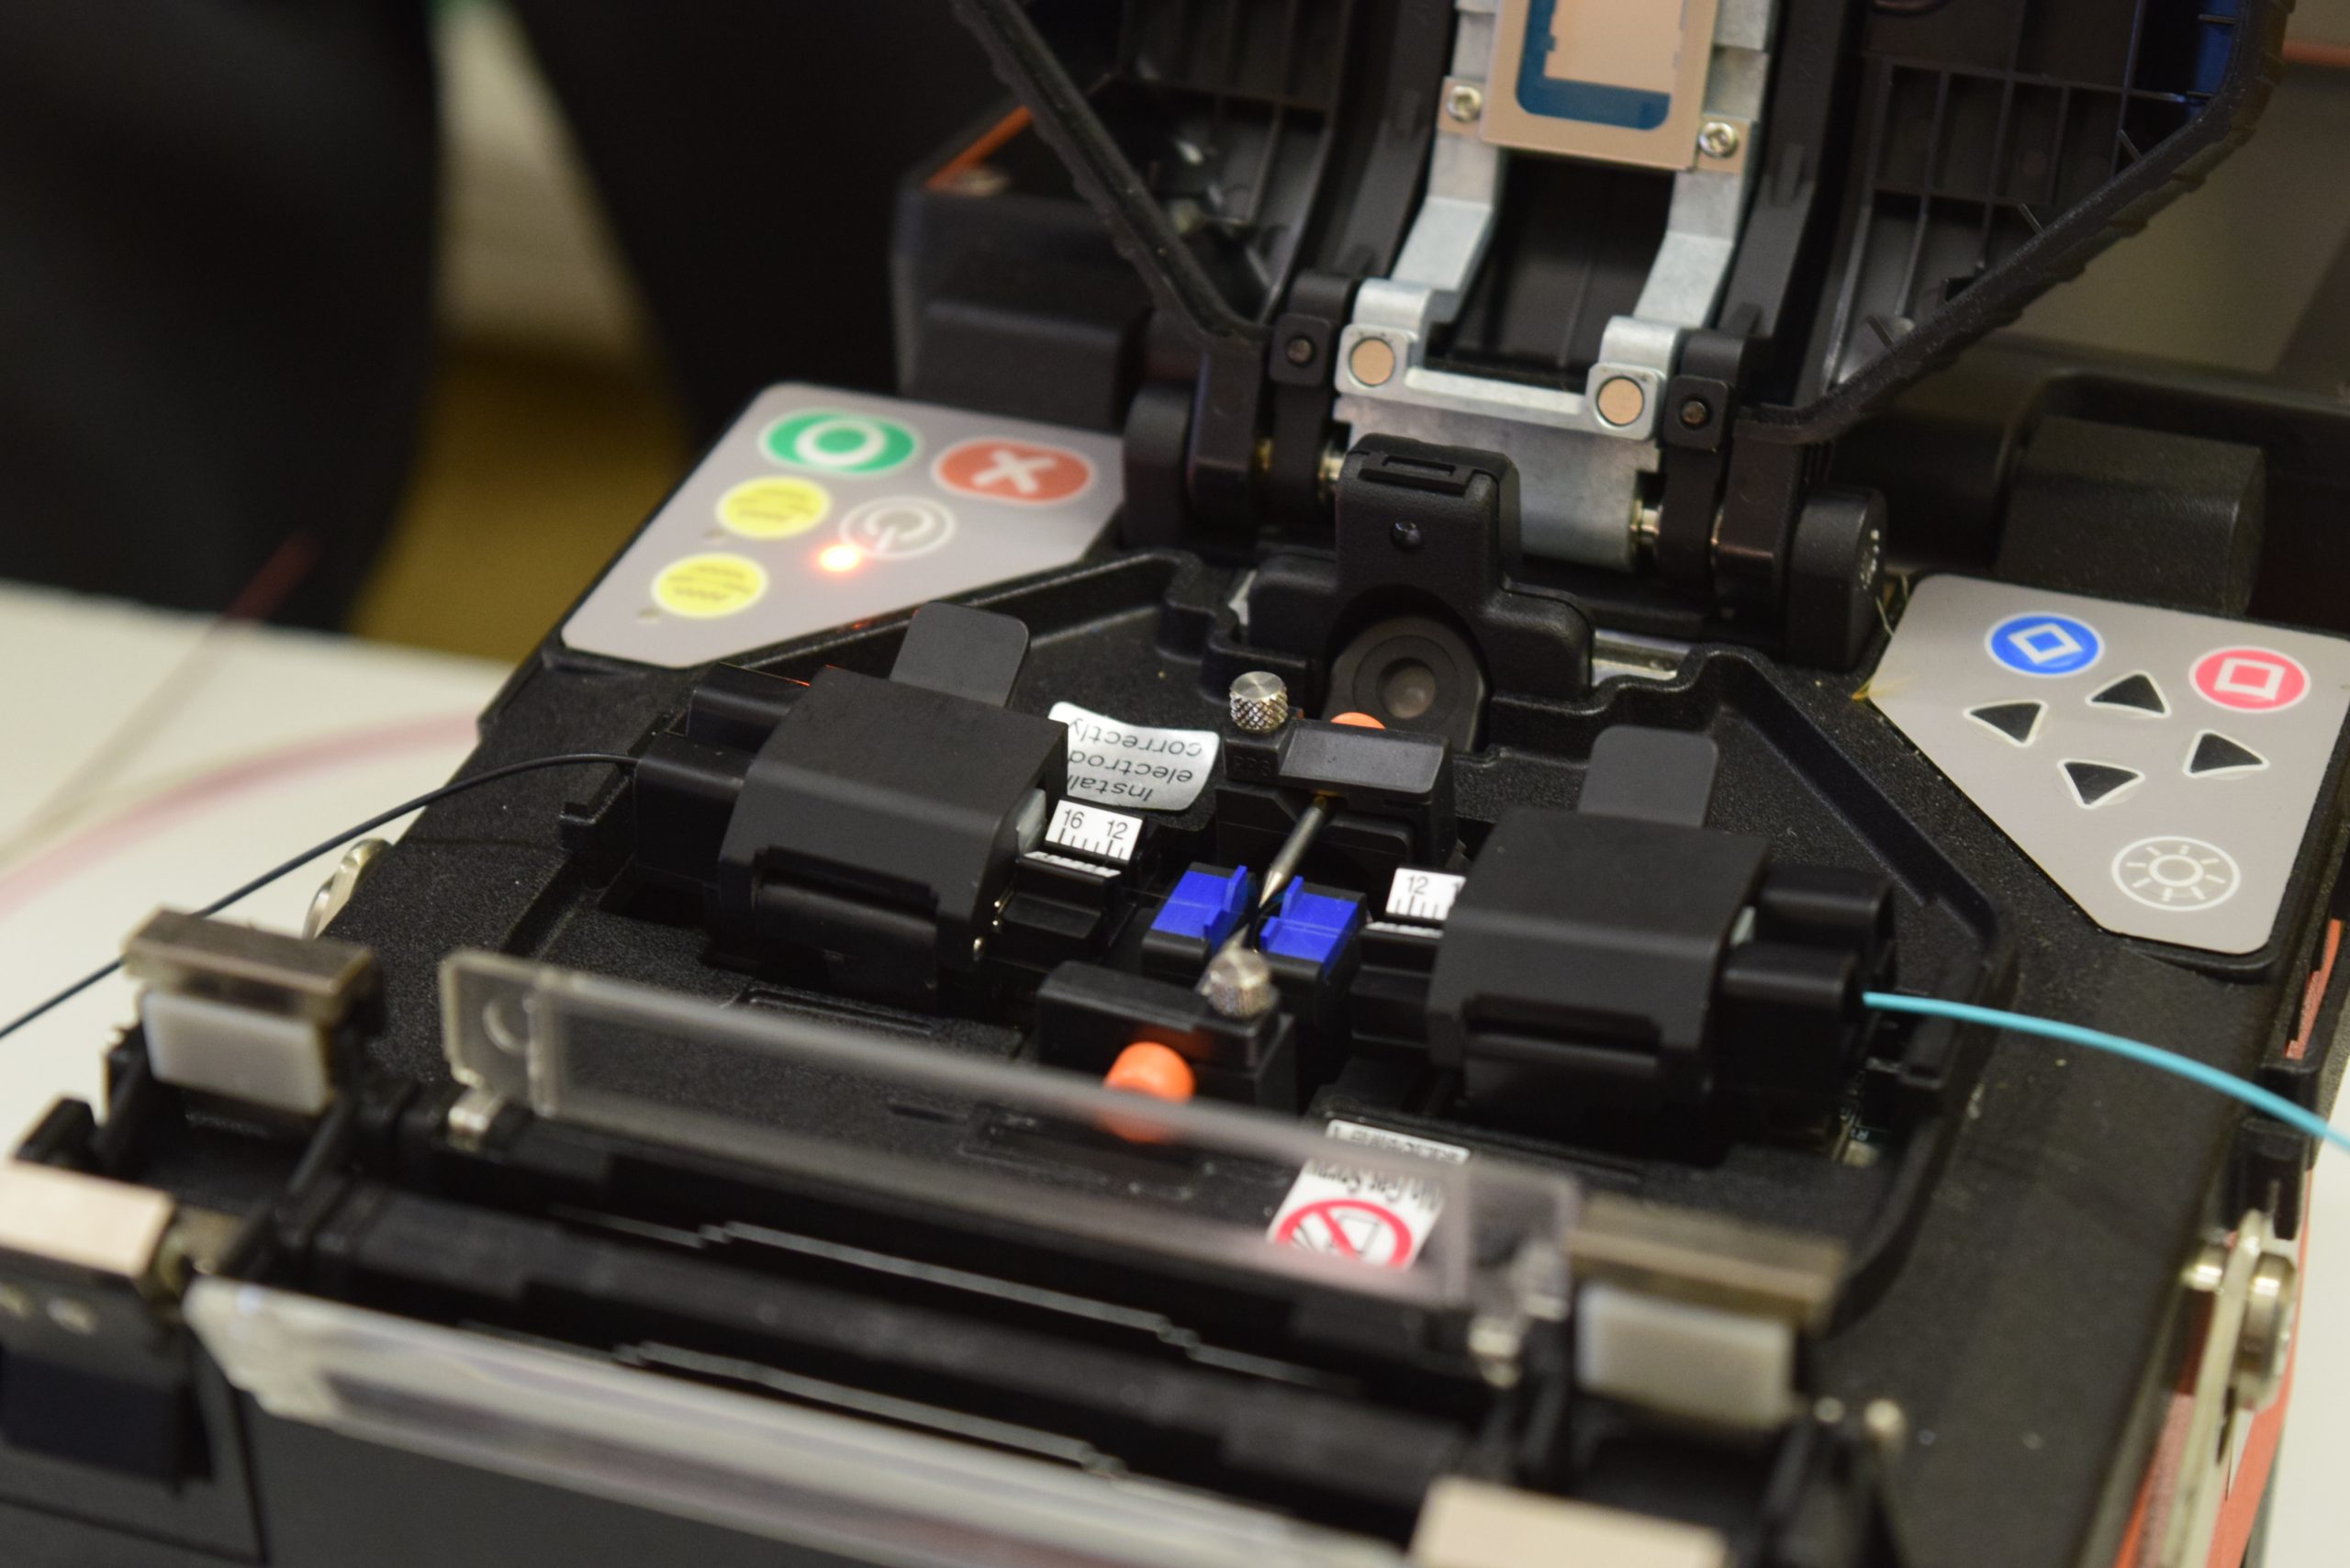 Close-up photo of fibers in a splicing machine, highlighting the precision and technical expertise involved in the fiber optic cable splicing process.